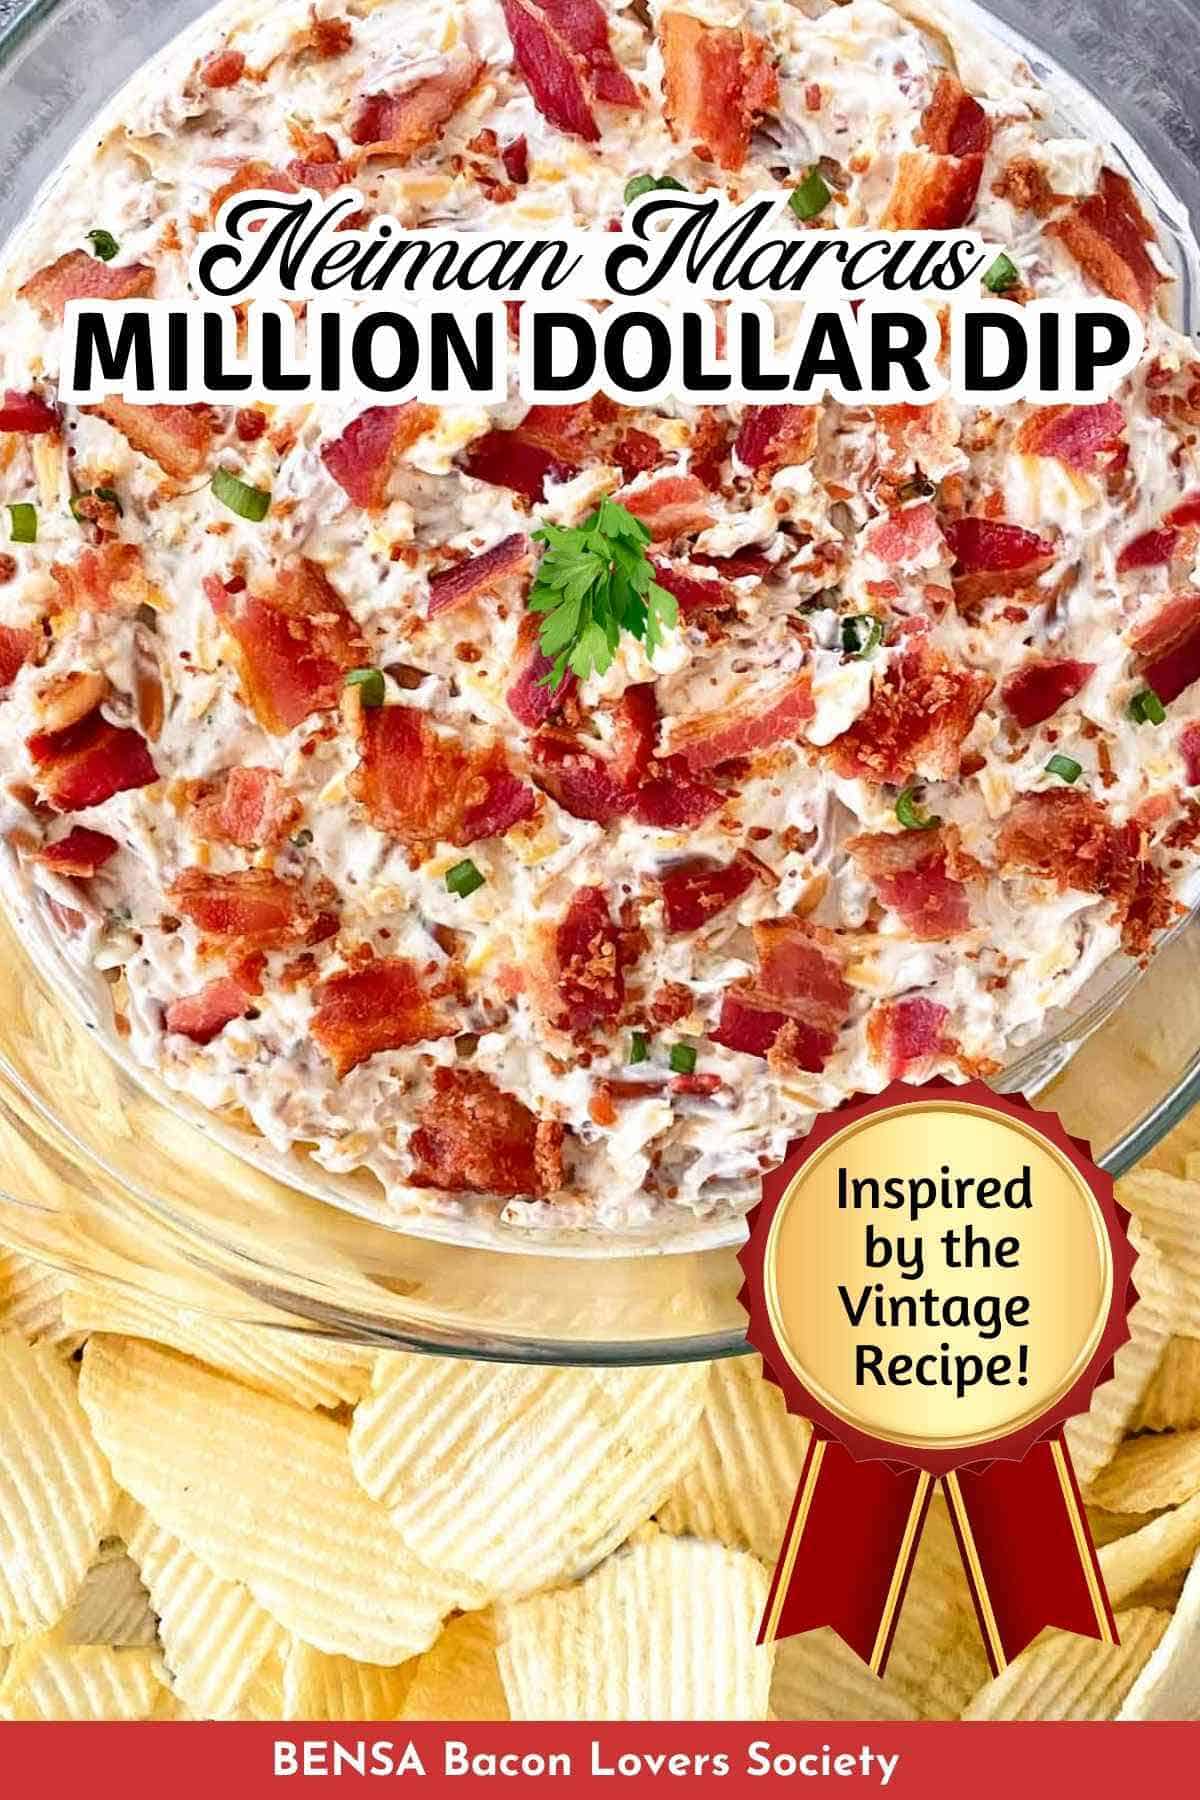 A bowl of Neiman Marcus Million Dollar Dip garnished with parsley and chopped green onions.